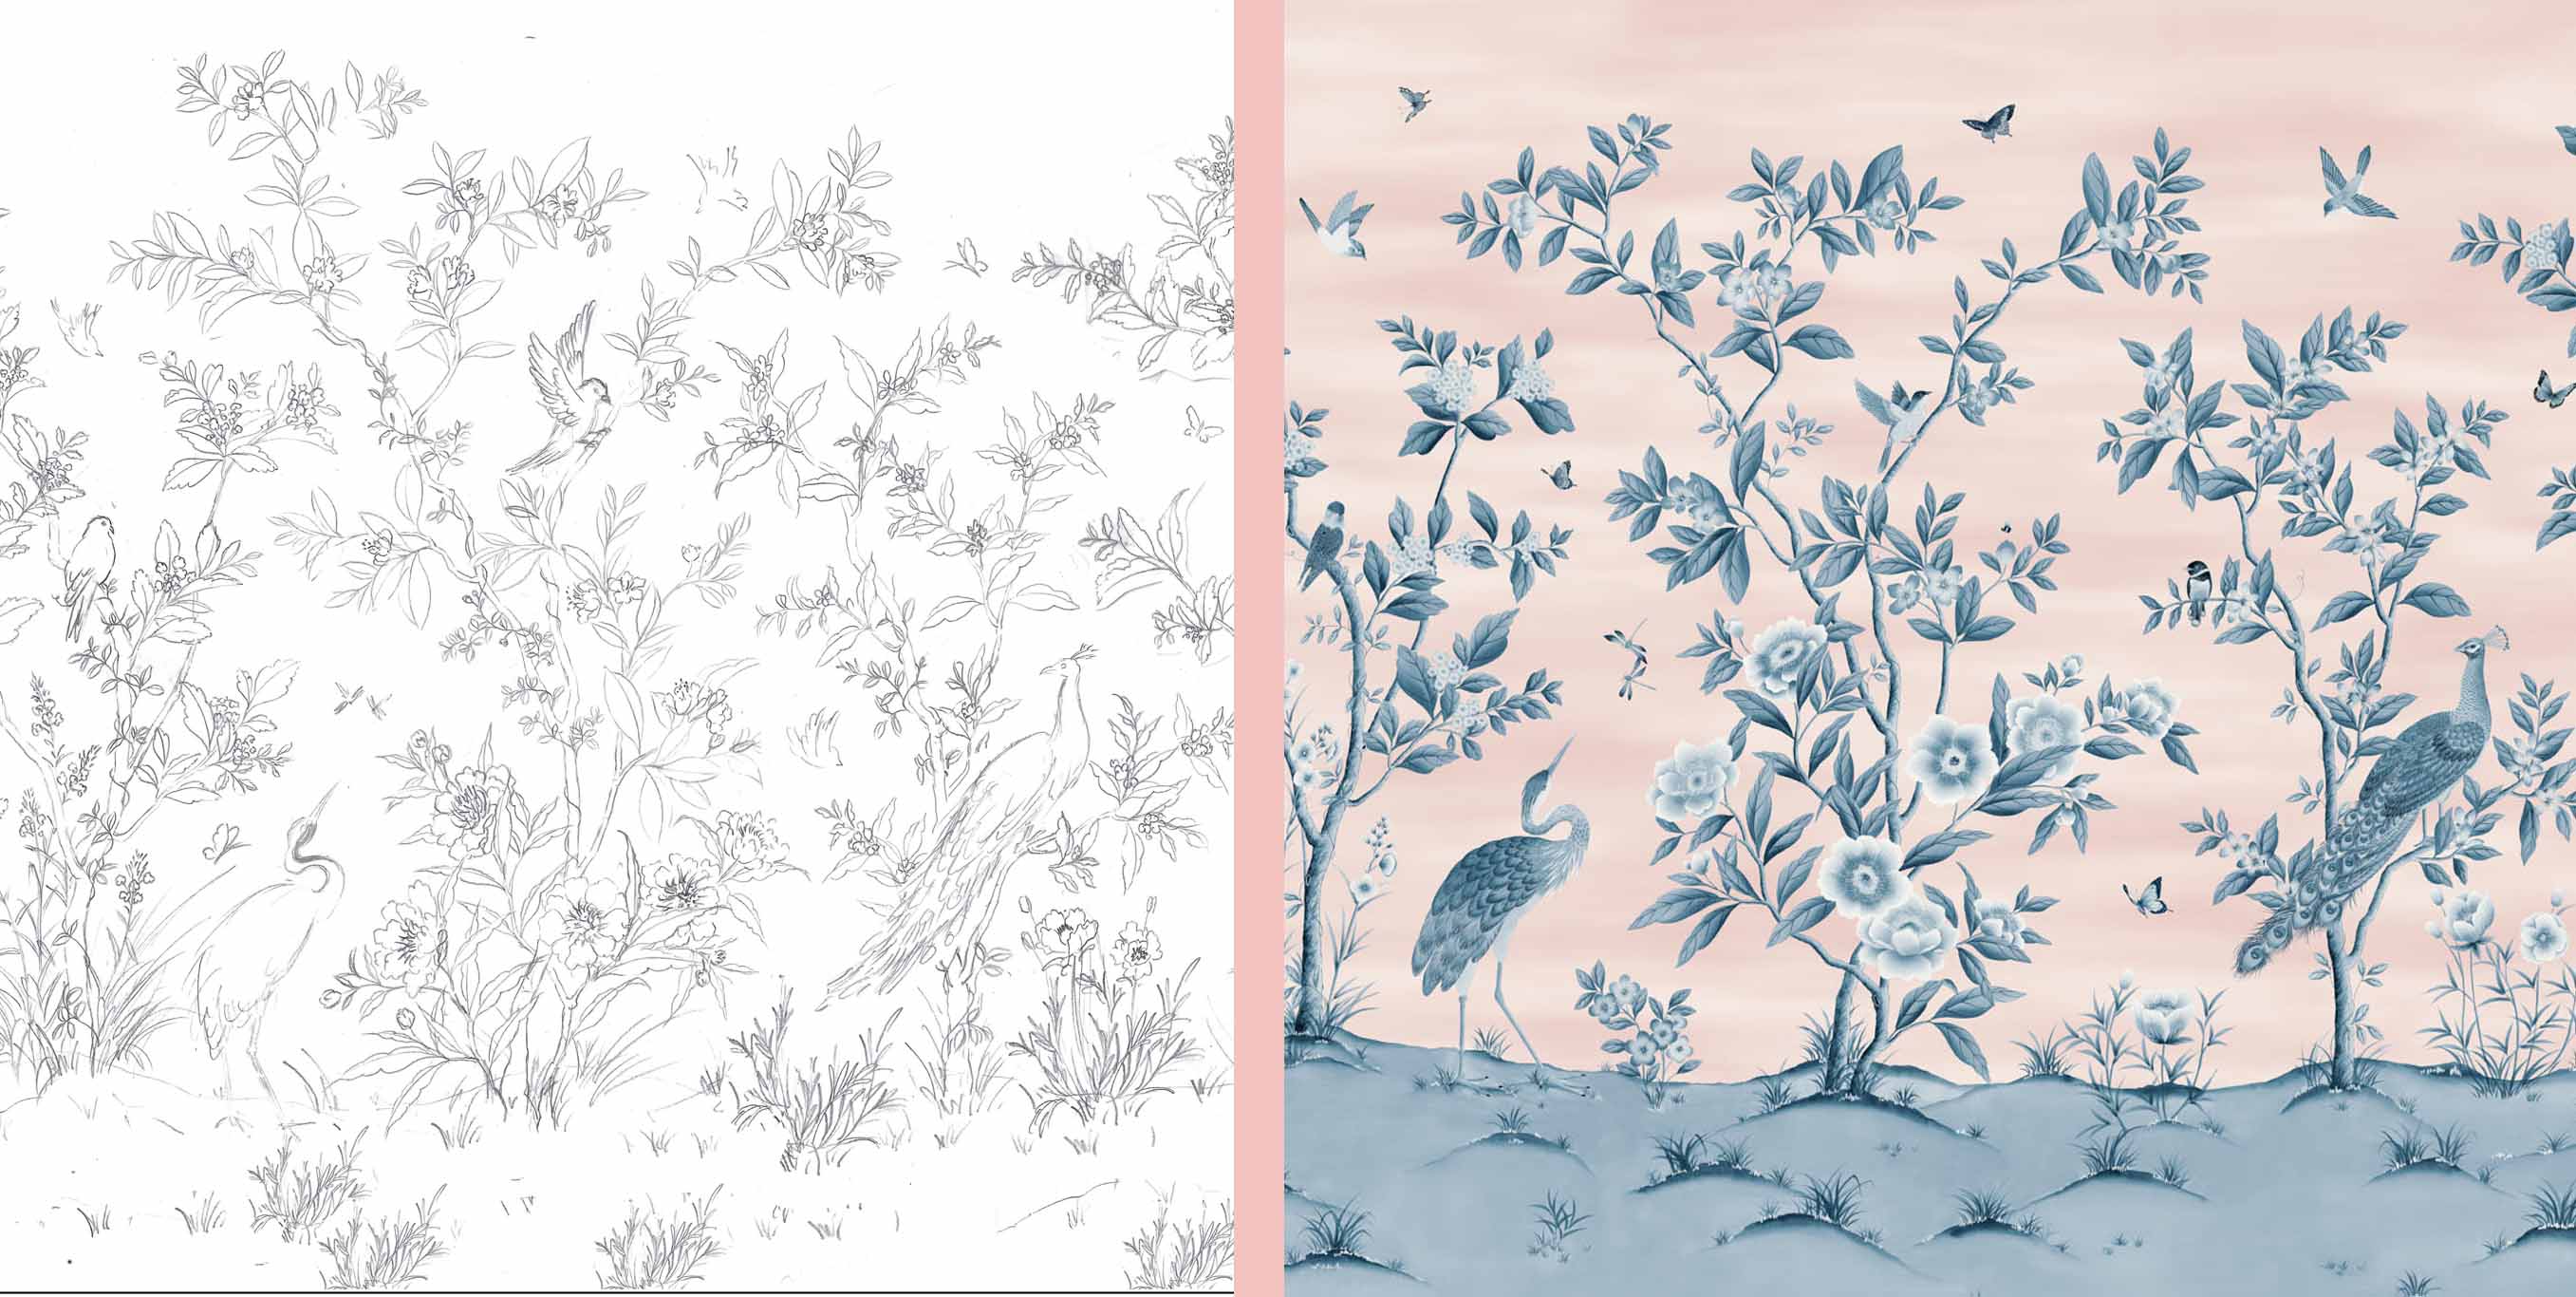 Chinoiserie wallpaper initial design in black and white and finished piece in powder blue on pink background